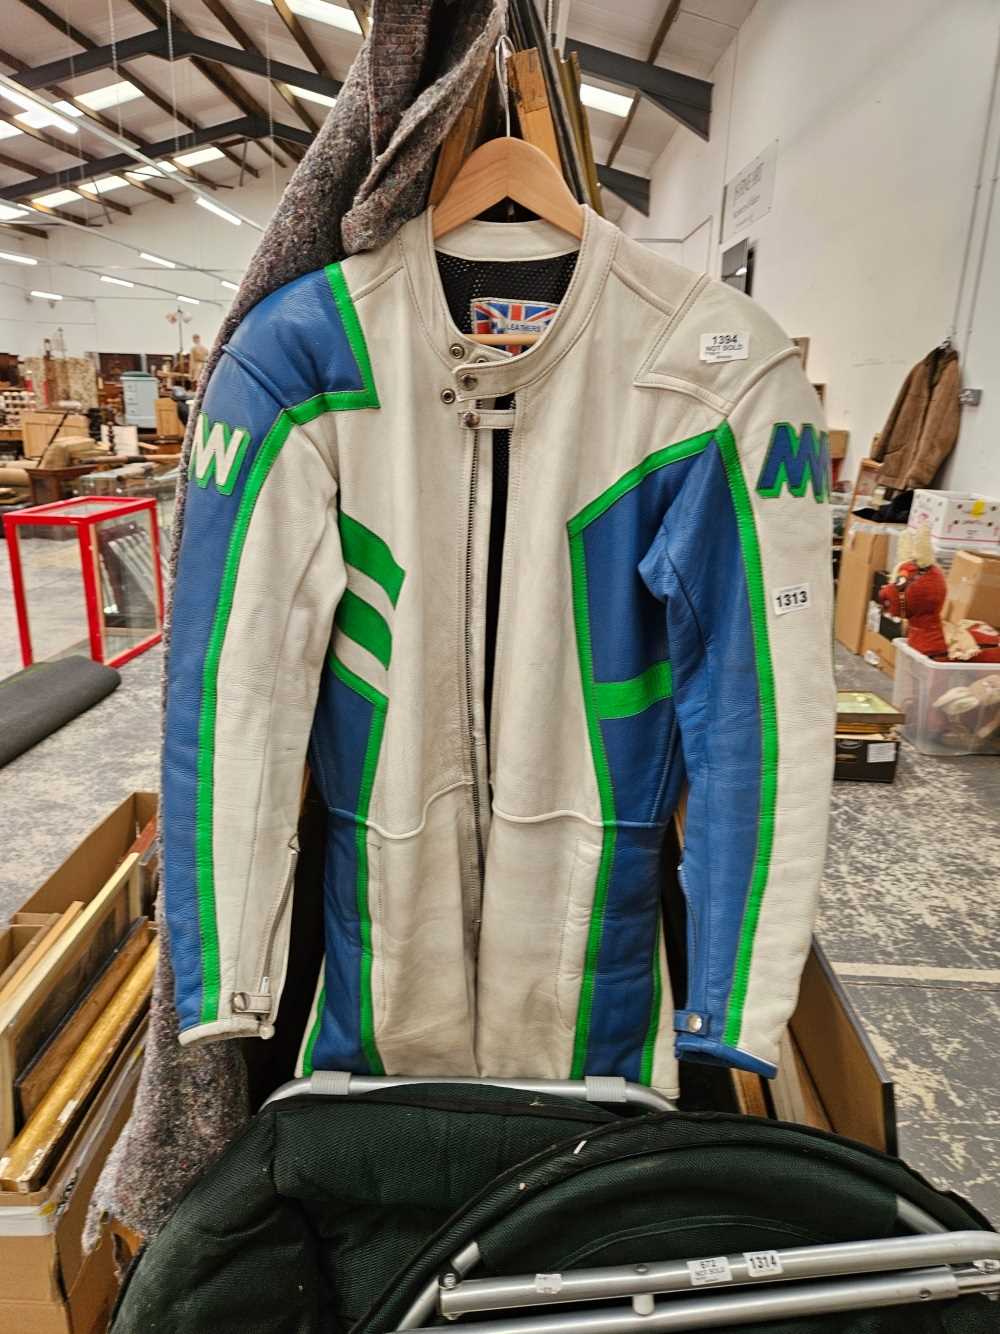 Vintage Mike Willis MW leathers, motorcycle racing one piece suit blue vivid green and white